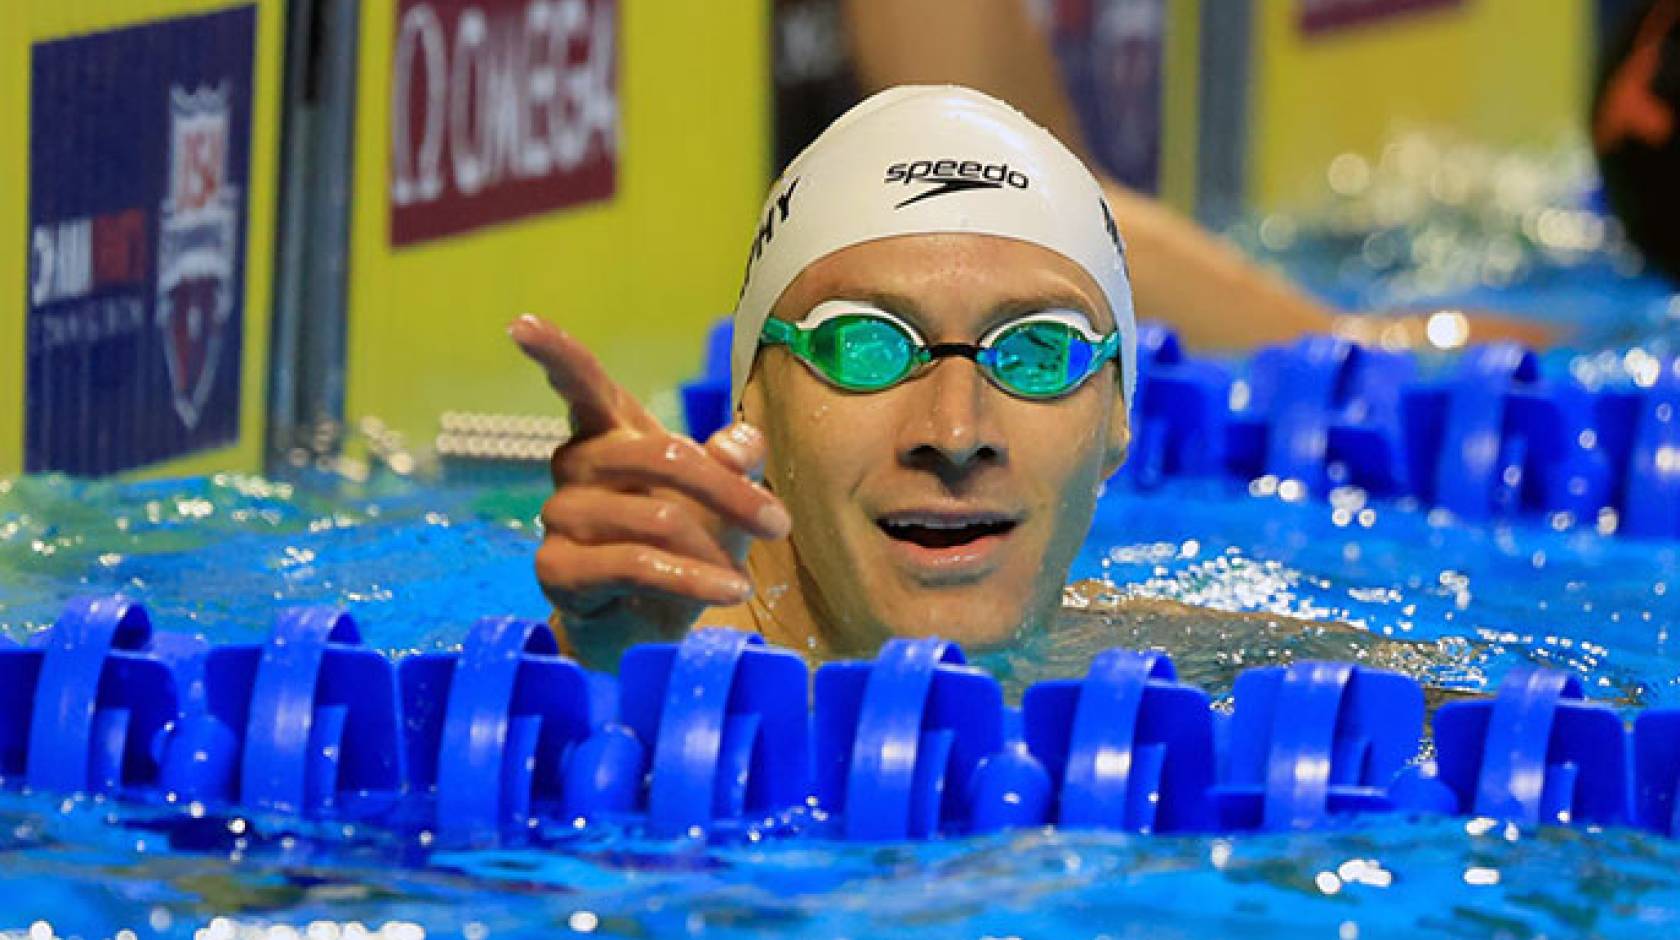 Ryan Murphy pointing from the pool in cap and googles just after a race